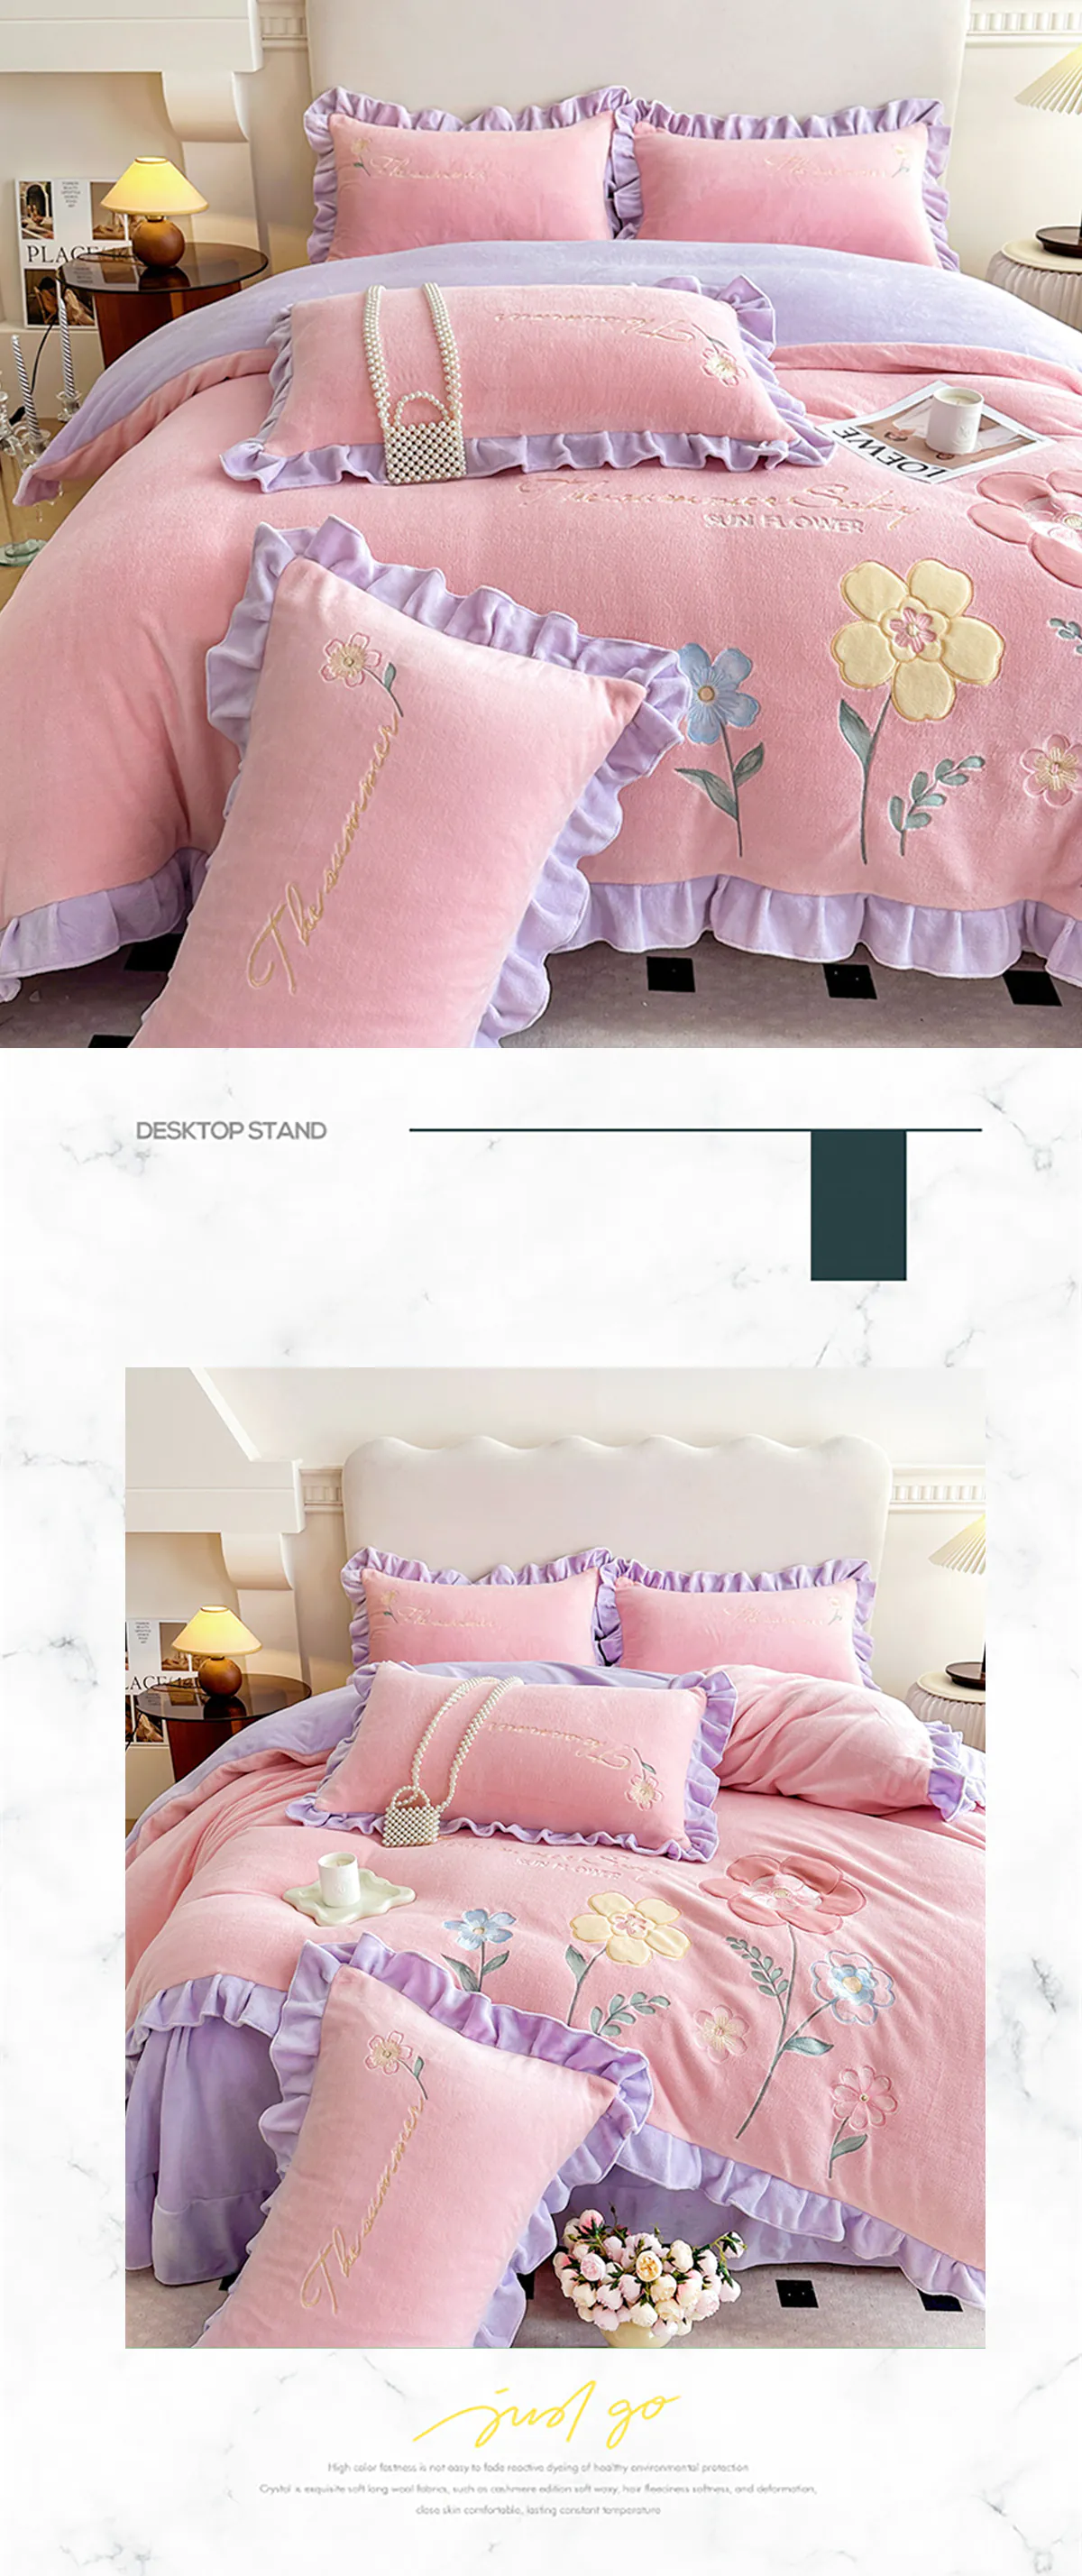 Comfy-Milk-Fiber-Embroidery-Quilt-Cover-Bed-Sheet-Pillowcases-Set24